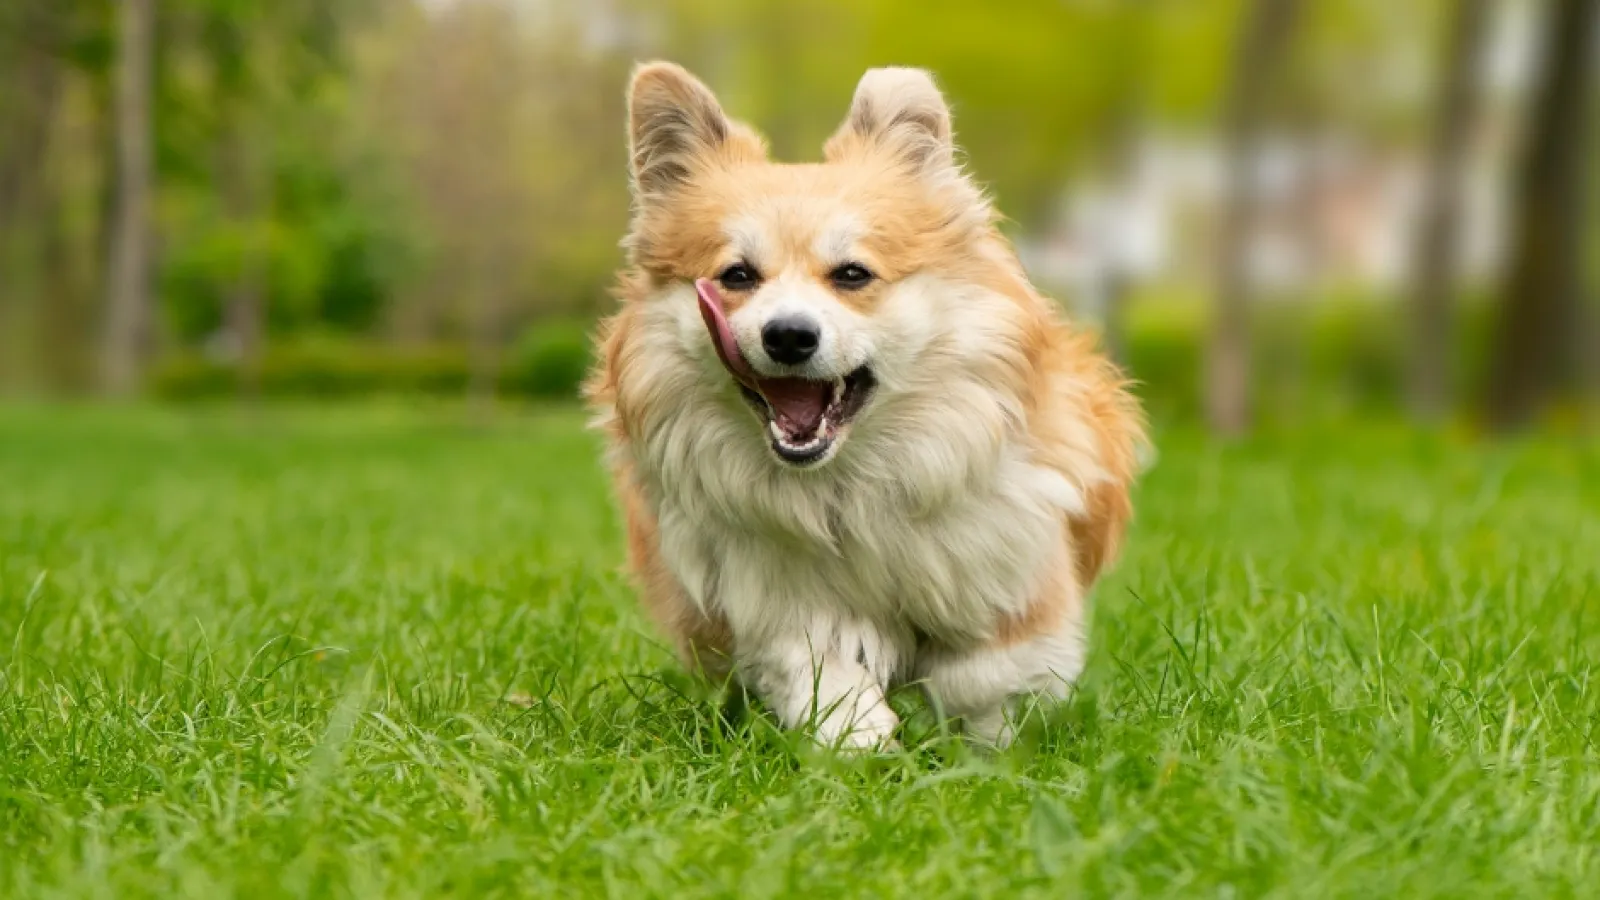 a dog running in a grassy area